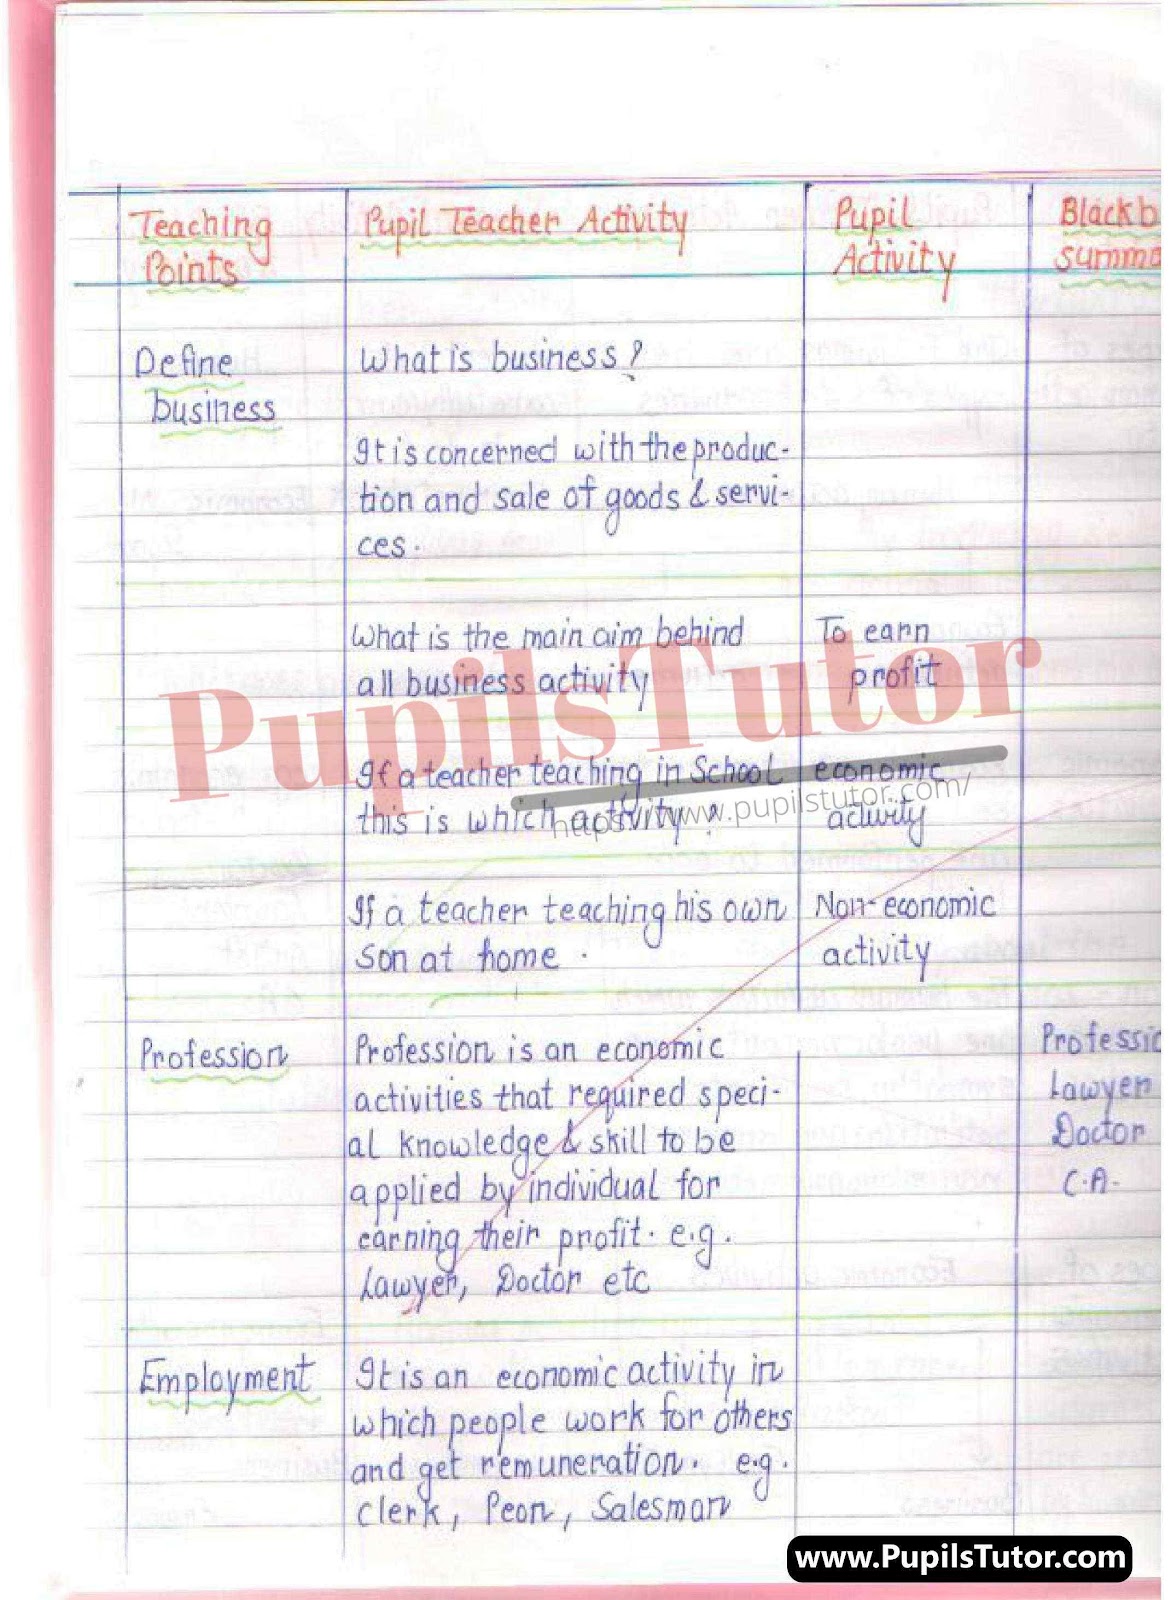 Commerce Lesson Plan On Human Activities For Class/Grade 11 And 12 For CBSE NCERT School And College Teachers  – (Page And Image Number 3) – www.pupilstutor.com